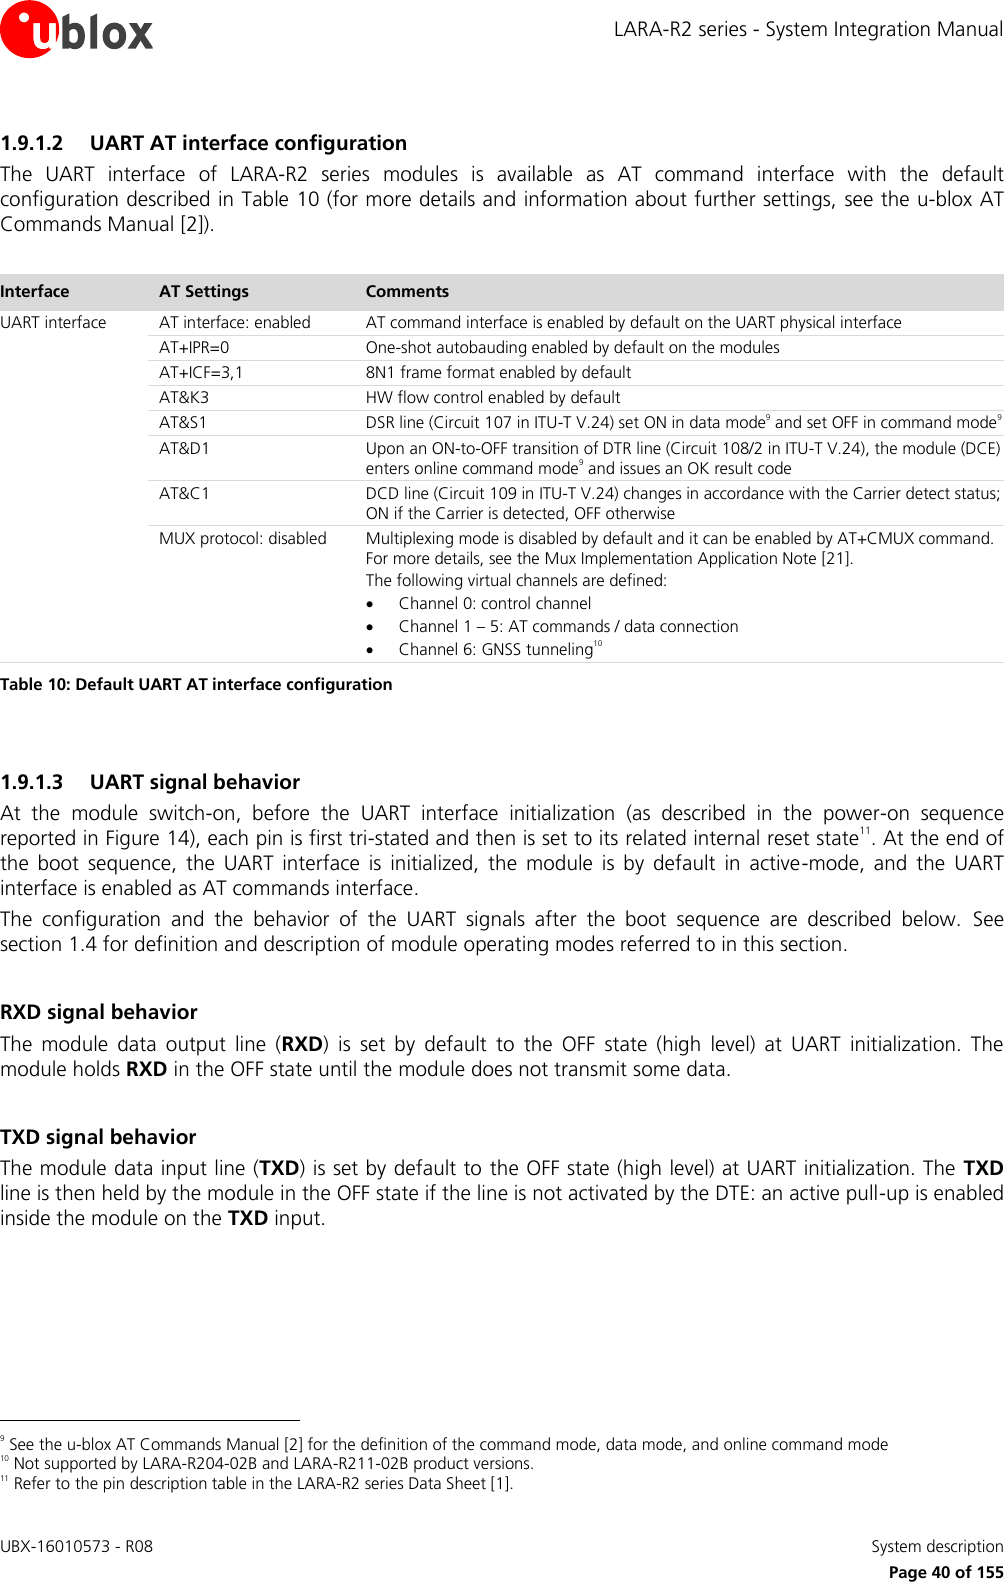 LARA-R2 series - System Integration Manual UBX-16010573 - R08    System description     Page 40 of 155 1.9.1.2 UART AT interface configuration The  UART  interface  of  LARA-R2  series  modules  is  available  as  AT  command  interface  with  the  default configuration described in Table 10 (for more details and information about further settings, see the u-blox AT Commands Manual [2]).  Interface AT Settings Comments UART interface AT interface: enabled AT command interface is enabled by default on the UART physical interface AT+IPR=0 One-shot autobauding enabled by default on the modules AT+ICF=3,1 8N1 frame format enabled by default AT&amp;K3 HW flow control enabled by default AT&amp;S1 DSR line (Circuit 107 in ITU-T V.24) set ON in data mode9 and set OFF in command mode9 AT&amp;D1 Upon an ON-to-OFF transition of DTR line (Circuit 108/2 in ITU-T V.24), the module (DCE) enters online command mode9 and issues an OK result code AT&amp;C1 DCD line (Circuit 109 in ITU-T V.24) changes in accordance with the Carrier detect status; ON if the Carrier is detected, OFF otherwise MUX protocol: disabled Multiplexing mode is disabled by default and it can be enabled by AT+CMUX command. For more details, see the Mux Implementation Application Note [21]. The following virtual channels are defined:  Channel 0: control channel  Channel 1 – 5: AT commands / data connection  Channel 6: GNSS tunneling10 Table 10: Default UART AT interface configuration  1.9.1.3 UART signal behavior At  the  module  switch-on,  before  the  UART  interface  initialization  (as  described  in  the  power-on  sequence reported in Figure 14), each pin is first tri-stated and then is set to its related internal reset state11. At the end of the  boot  sequence,  the  UART  interface  is  initialized,  the  module  is  by  default  in  active-mode,  and  the  UART interface is enabled as AT commands interface. The  configuration  and  the  behavior  of  the  UART  signals  after  the  boot  sequence  are  described  below.  See section 1.4 for definition and description of module operating modes referred to in this section.  RXD signal behavior The  module  data  output  line  (RXD)  is  set  by  default  to  the  OFF  state  (high  level)  at  UART  initialization.  The module holds RXD in the OFF state until the module does not transmit some data.  TXD signal behavior The module data input line (TXD) is set by default to the OFF state (high level) at UART initialization. The TXD line is then held by the module in the OFF state if the line is not activated by the DTE: an active pull-up is enabled inside the module on the TXD input.                                                        9 See the u-blox AT Commands Manual [2] for the definition of the command mode, data mode, and online command mode 10 Not supported by LARA-R204-02B and LARA-R211-02B product versions. 11 Refer to the pin description table in the LARA-R2 series Data Sheet [1]. 